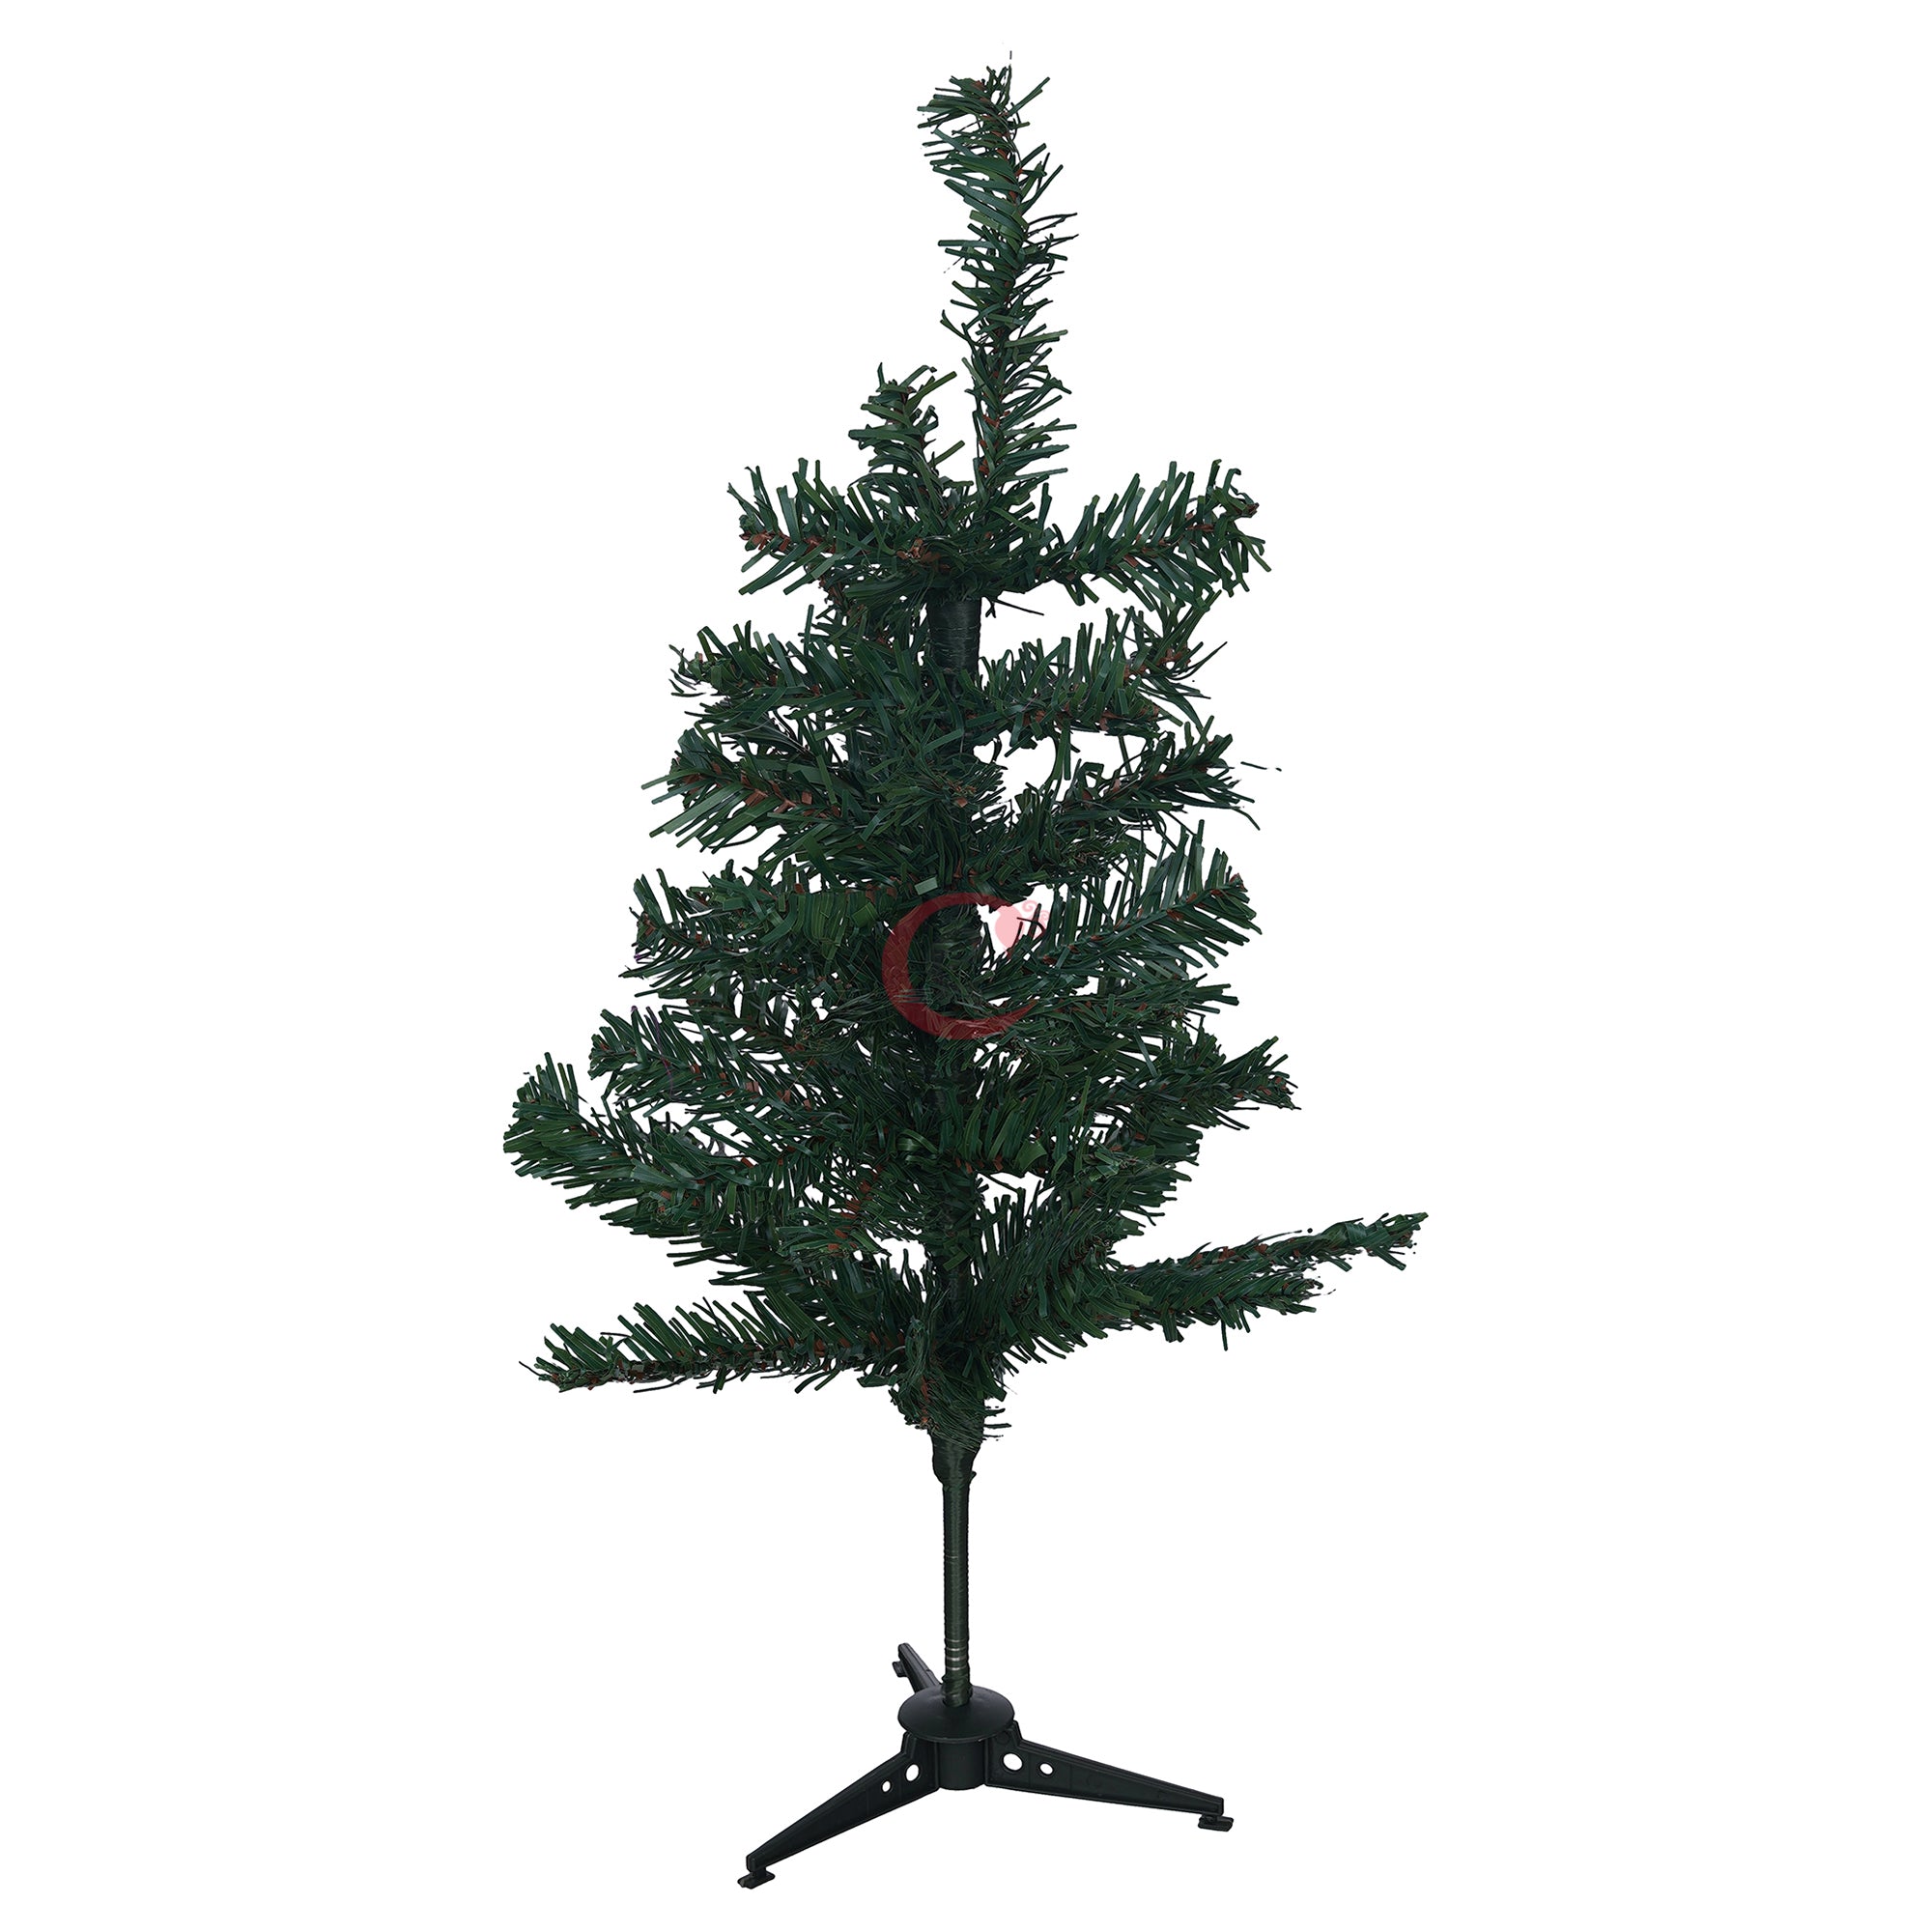 eCraftIndia 2 Feet Green Artificial Christmas Tree Xmas Pine Tree with Metal Stand - Xmas Tree for Indoor, Outdoor, Home, Living Room, Office, Church Decor - Merry Christmas Decoration Item 5